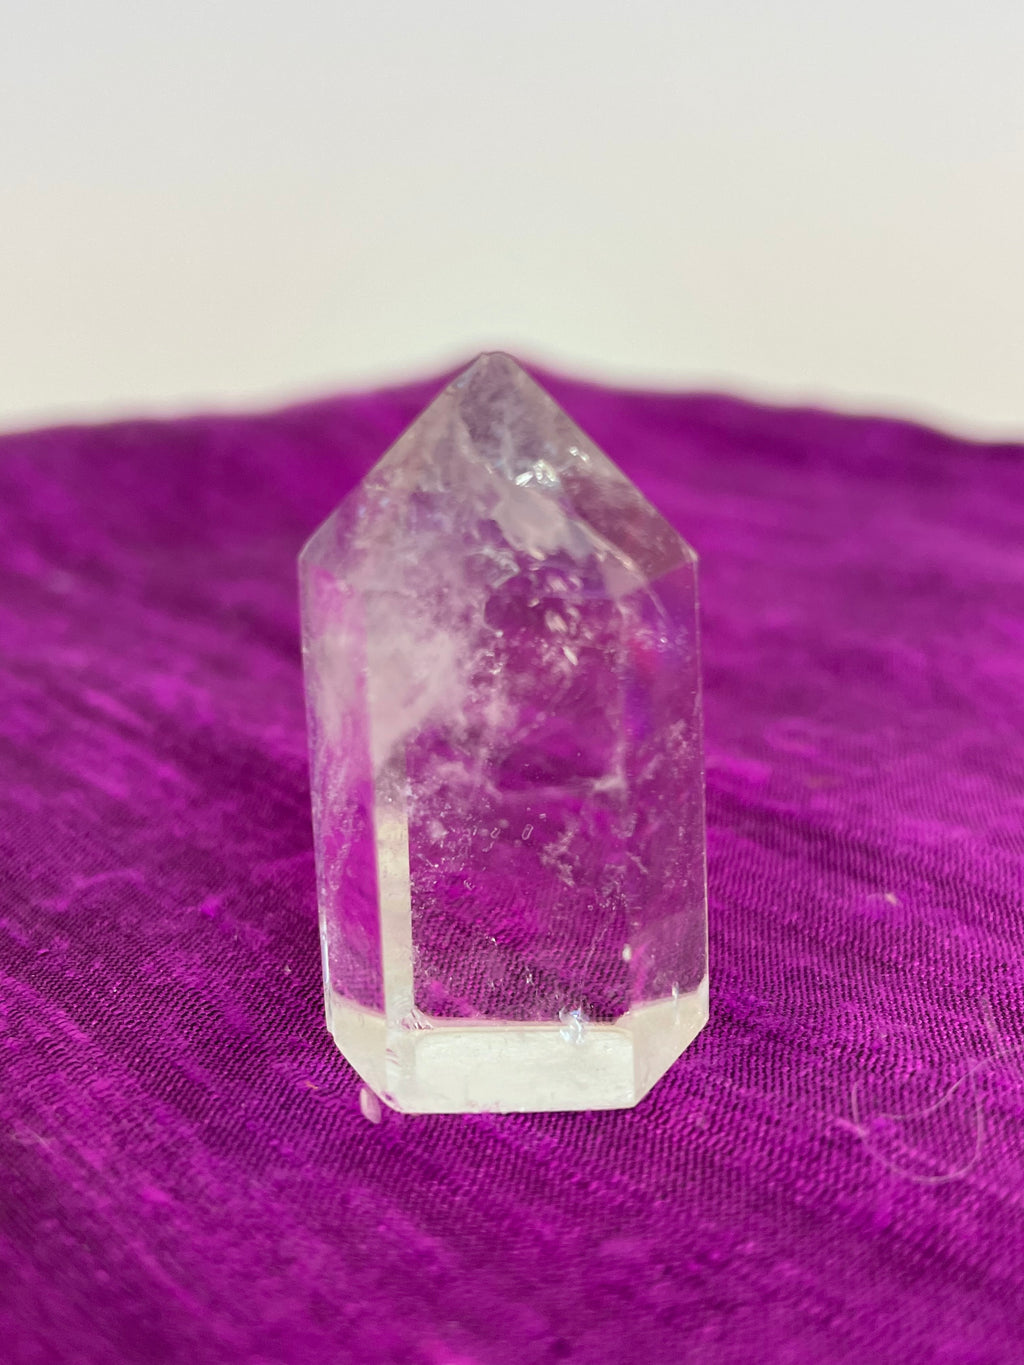 Beautiful clear crystal point holds both beauty and meaning. Quartz is the "most powerful healing and energy amplifier on the planet" (Judy Hall). It is cleansing to organs of the physical body and It also cleanses the soul and it increases your spiritual energy to the highest level (and so much more).  Place this on your altar, book shelf, nightstand or table. Use for meditation, healing, cleansing and more. Point is approximately 1½" tall. Cost is $5.98.